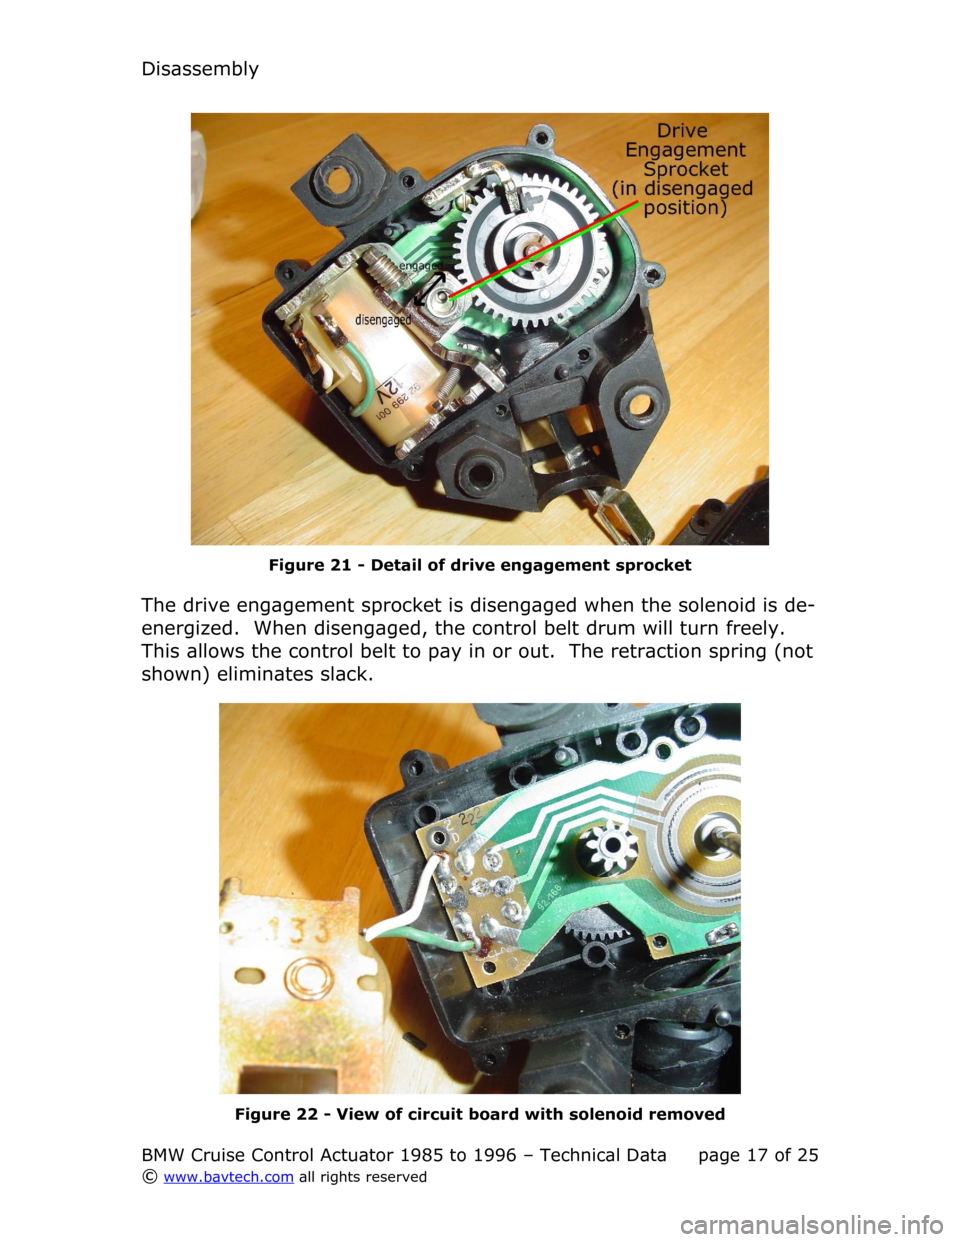 BMW 8 SERIES 1991 E31 Cruise Control Acutator Disassembly
Figure  21  - Detail of drive engagement sprocket
The drive engagement sprocket is disengaged when the solenoid is de-
energized.  When disengaged, the control belt drum will turn freely. 